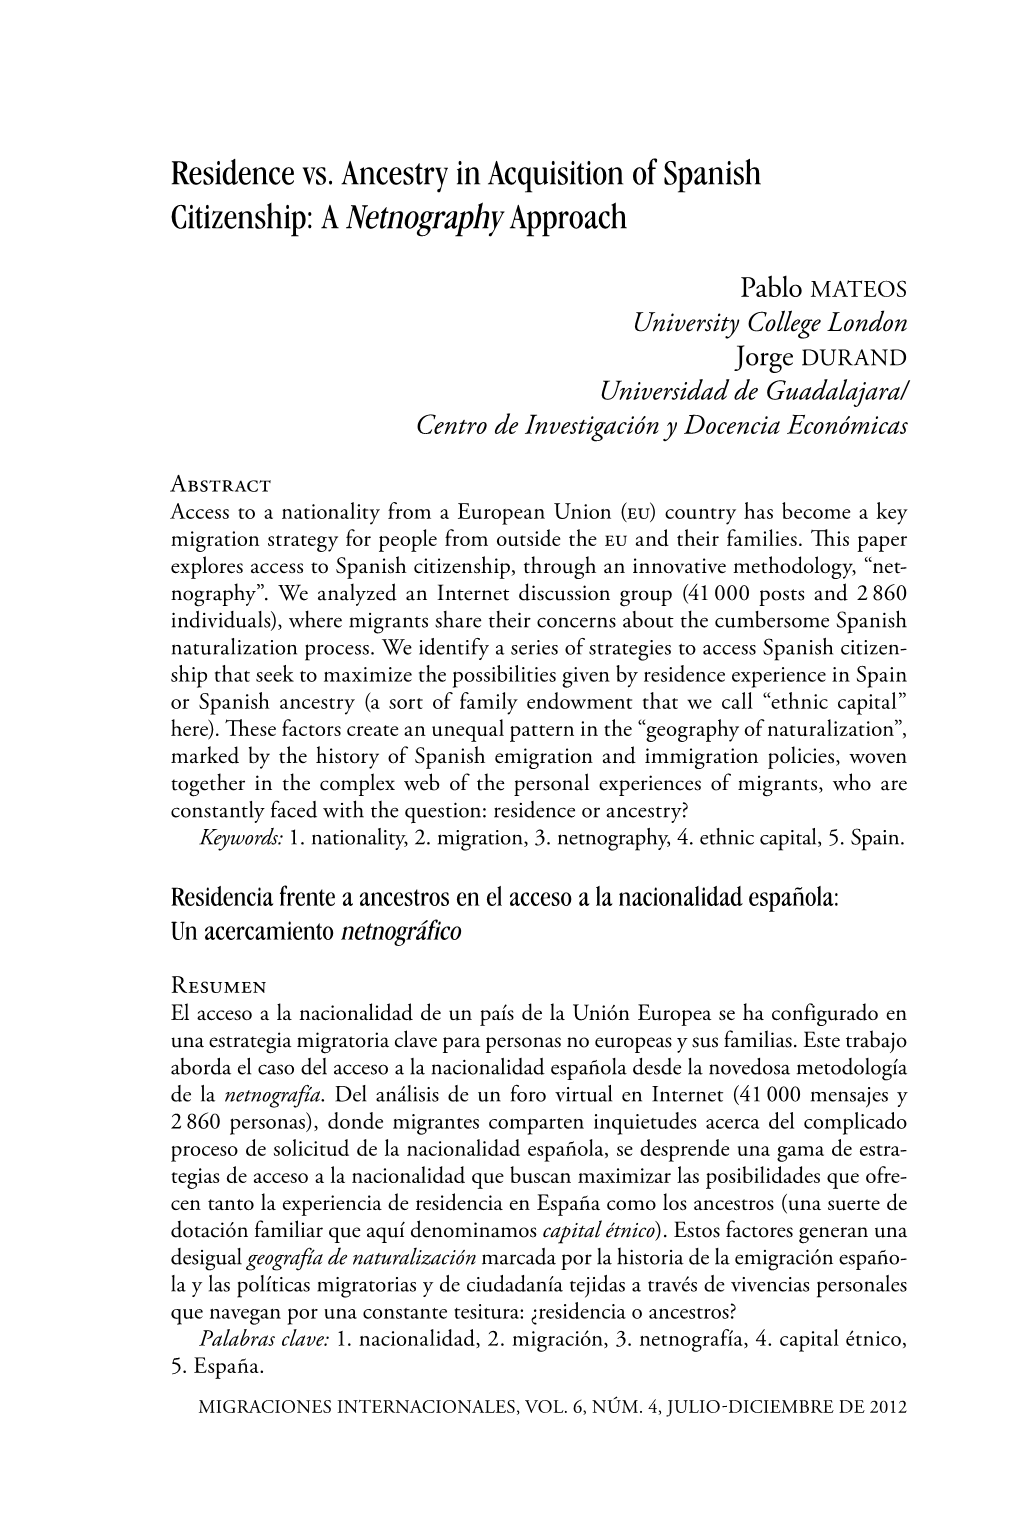 Residence Vs. Ancestry in Acquisition of Spanish Citizenship: a Netnography Approach